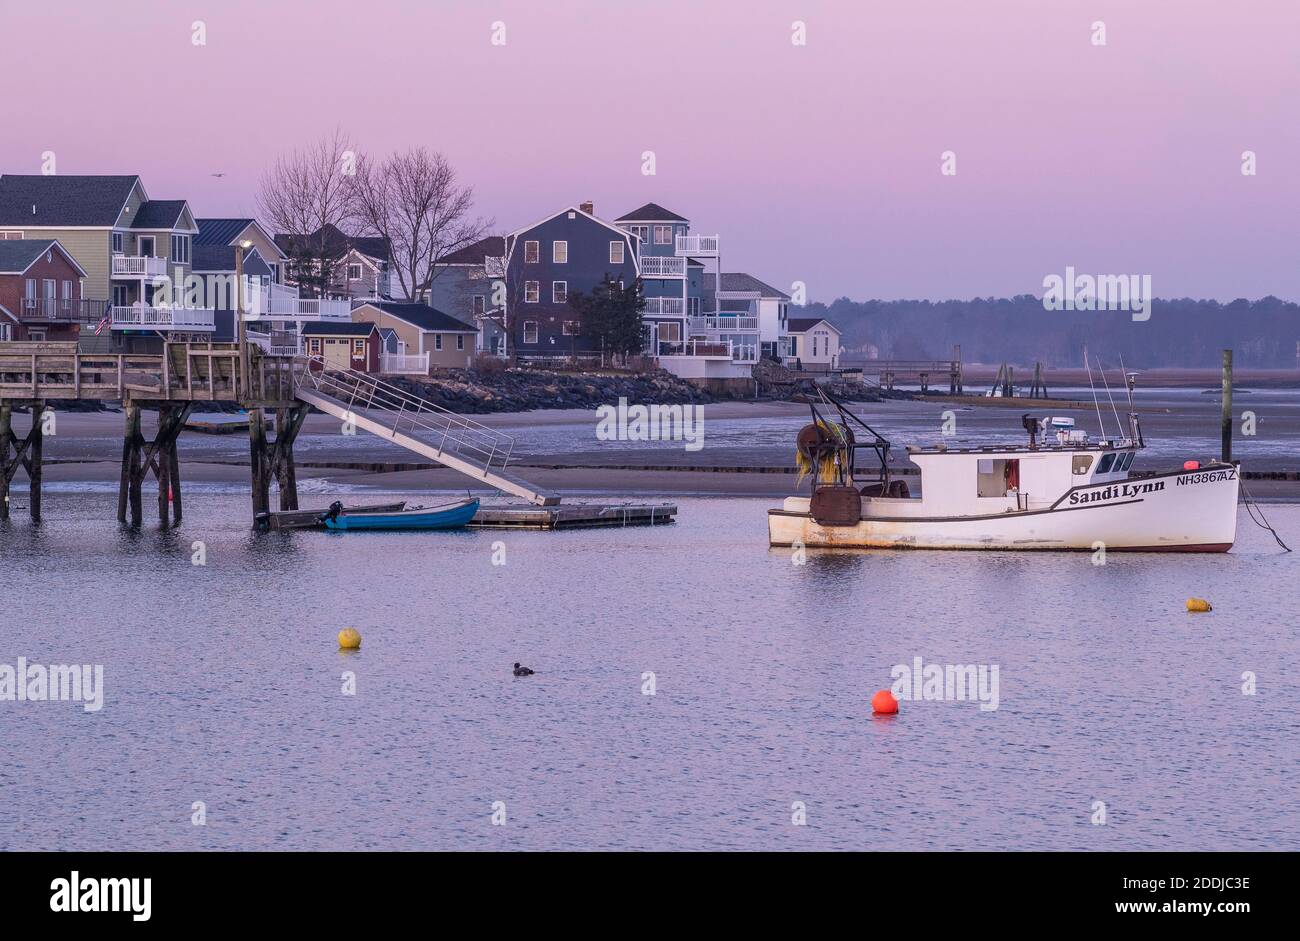 Seabrook is big on fishing both commerical and hobby. Populated region with summer homes mostly. Plenty of waterfront dining here. Fresh fish! Stock Photo